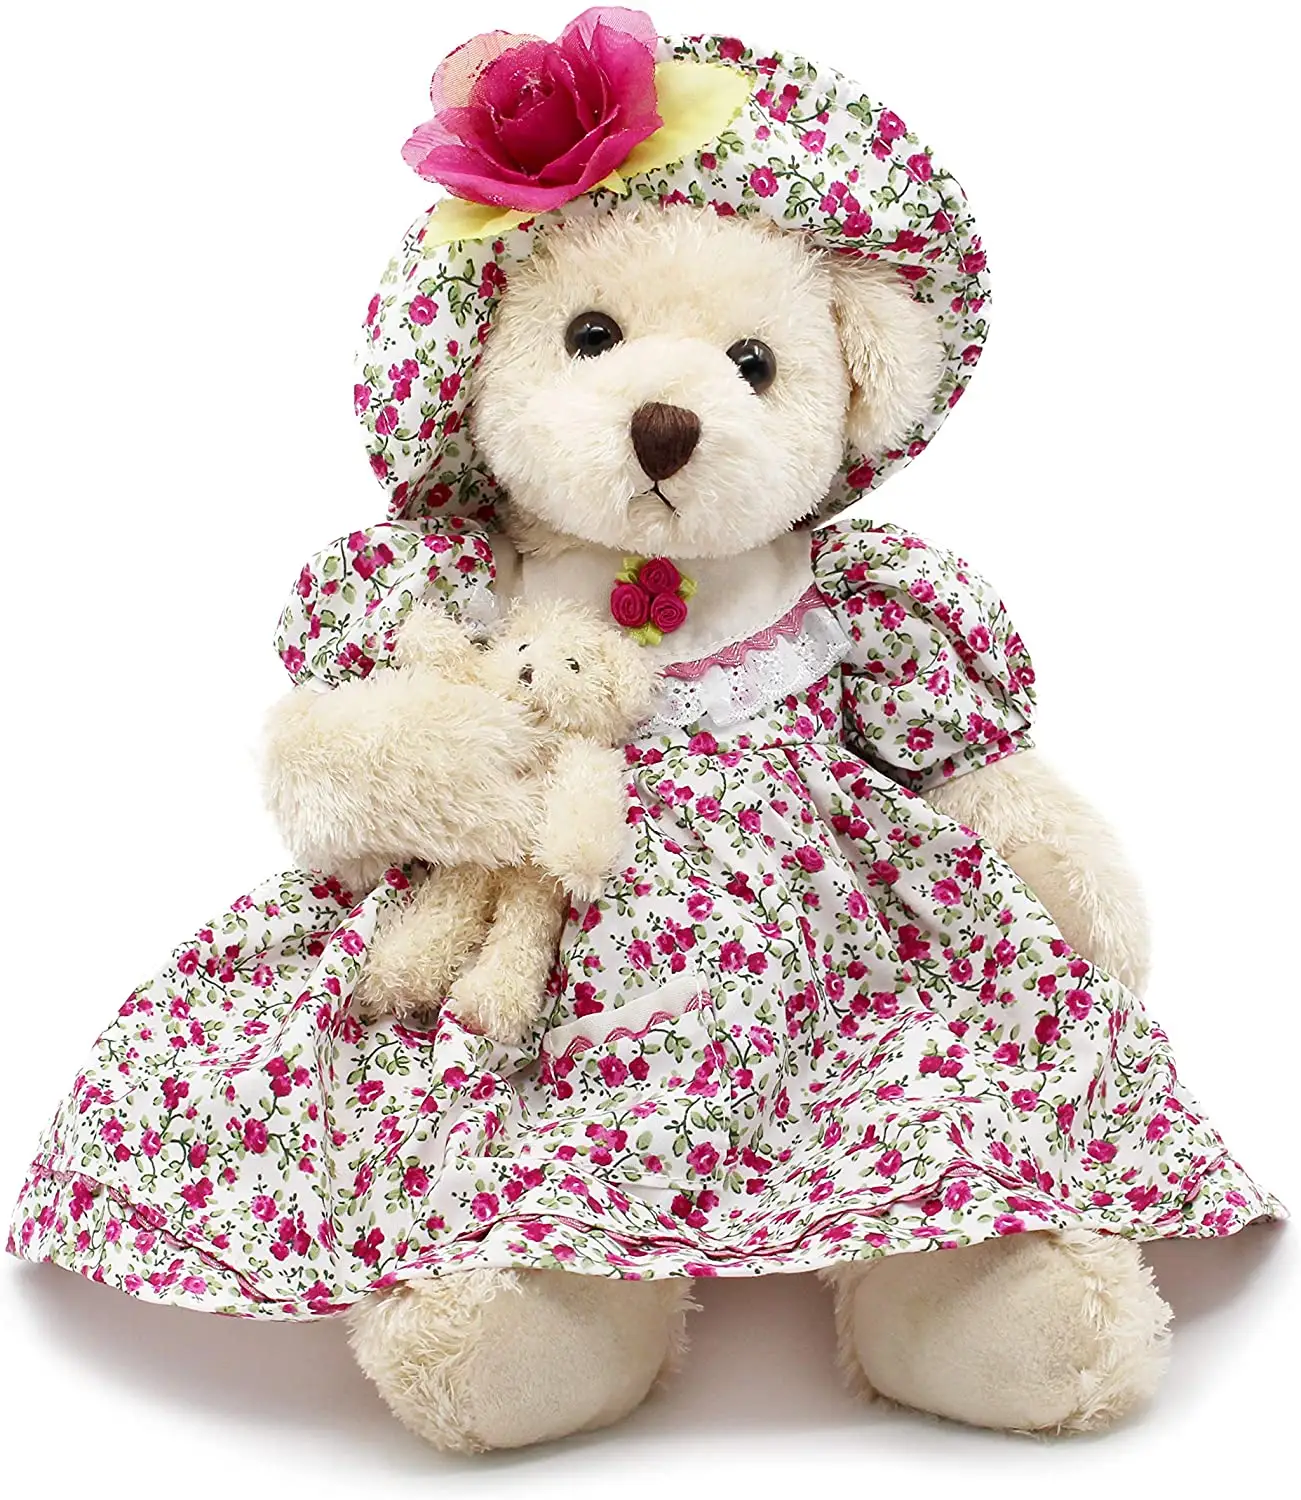 Custom Plush Toy Factory Customized Promo Doll Manufactures Baby Gift Stuffed bear flower clothing